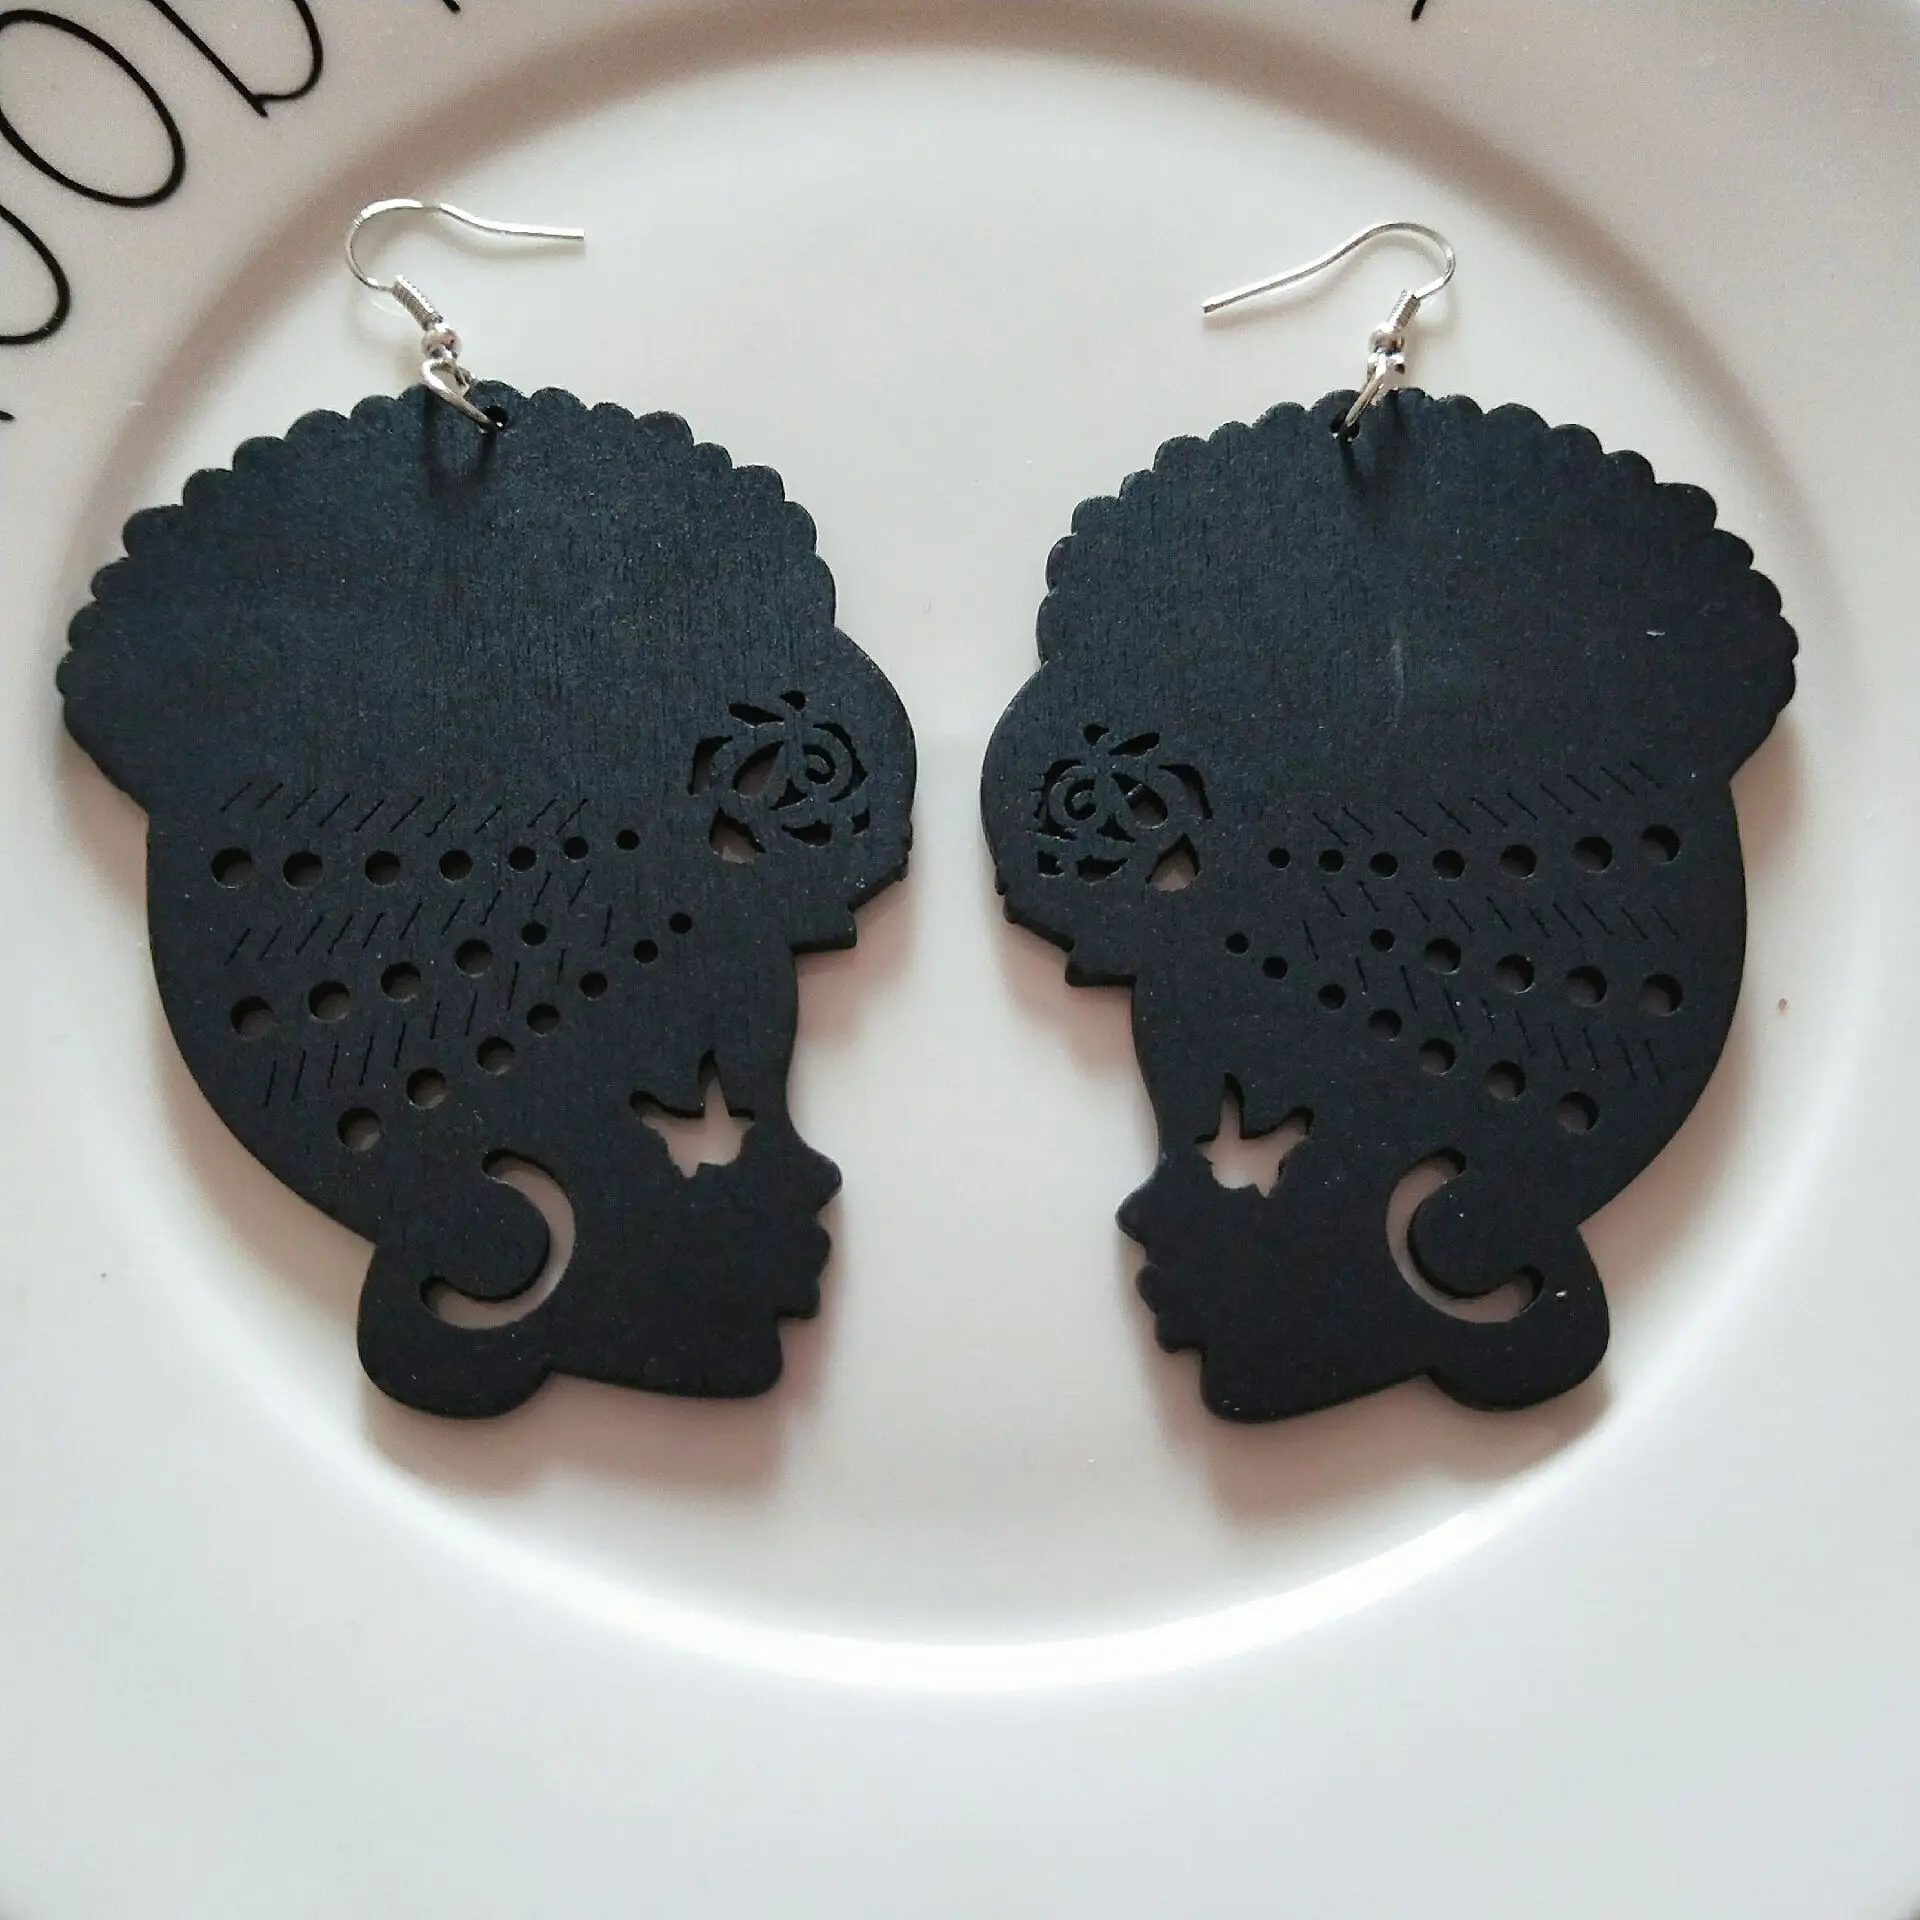 Tribal Wood Black Women Pattern Diy Painting Afro Vintage Earrings Brincos Wooden Boho African Bohemia Jewelry Party Accessory